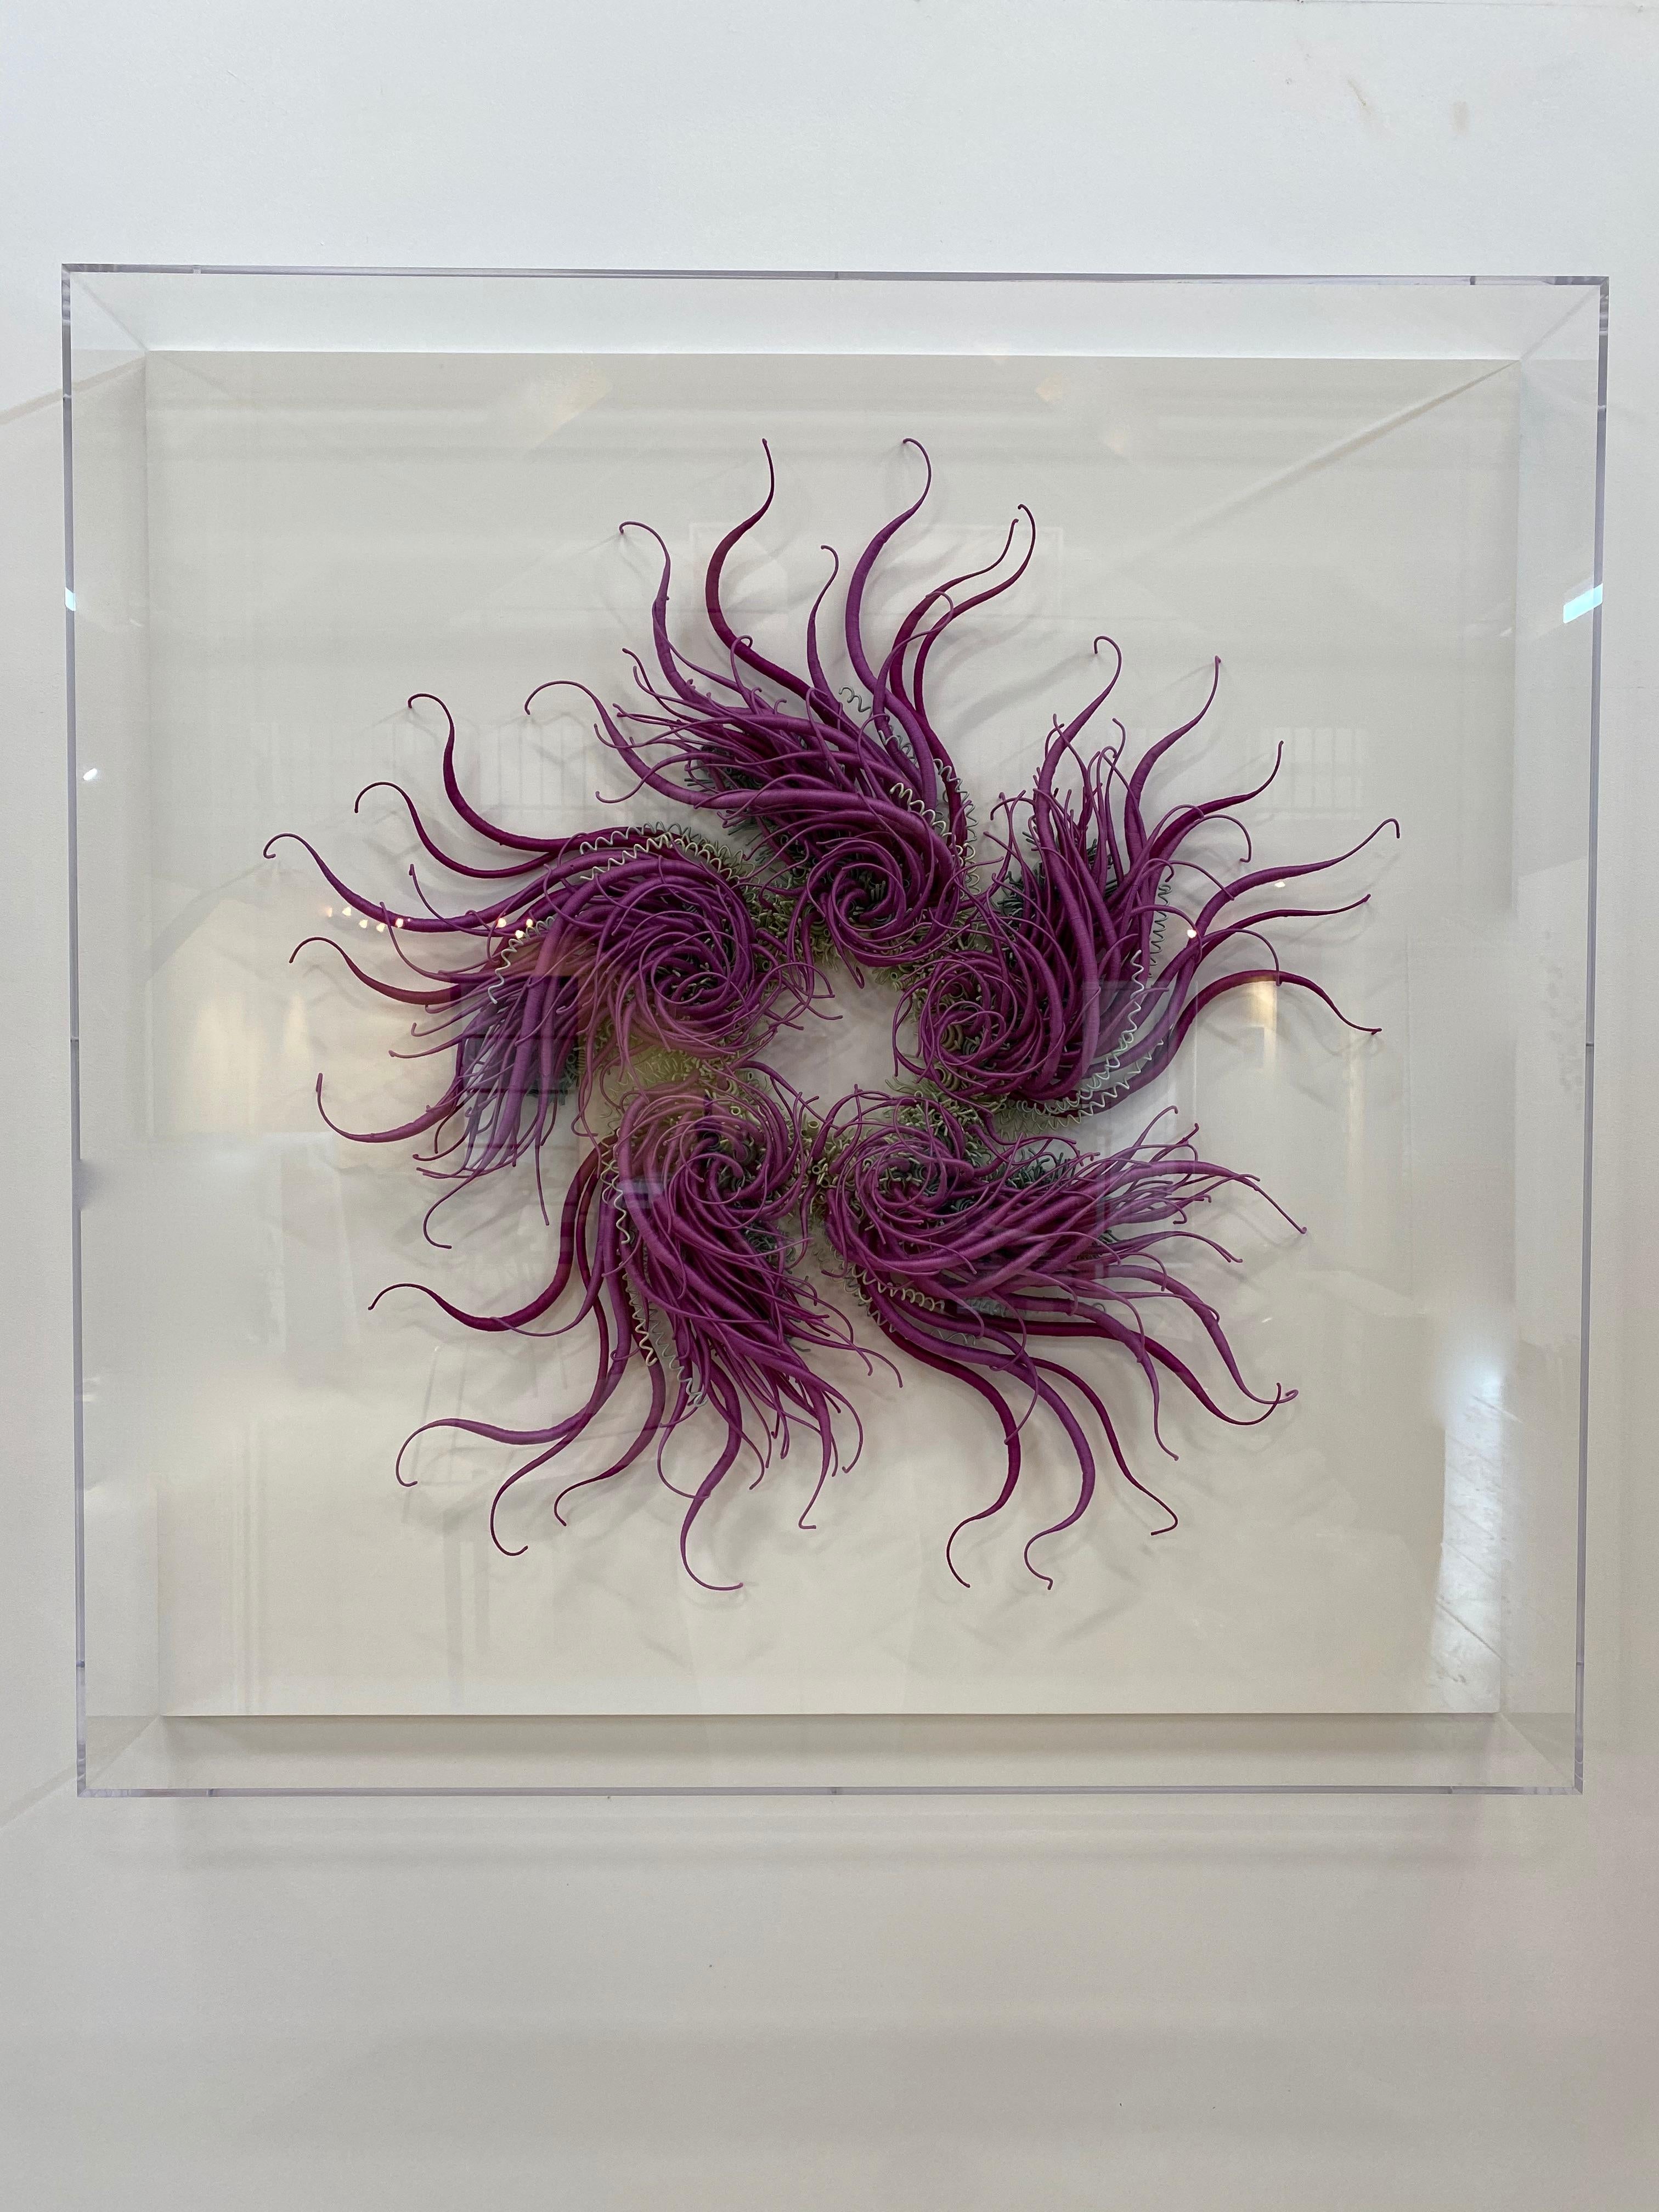 Framed in a clear acrylic shadowbox, Catherine Latson's Specimen 21 reads as an artistic rendition of a beautiful sea specimen. Rich, jewel-toned purple hand-dyed cotton thread is wrapped around tendrils that stretch from a delicate cluster of tiny